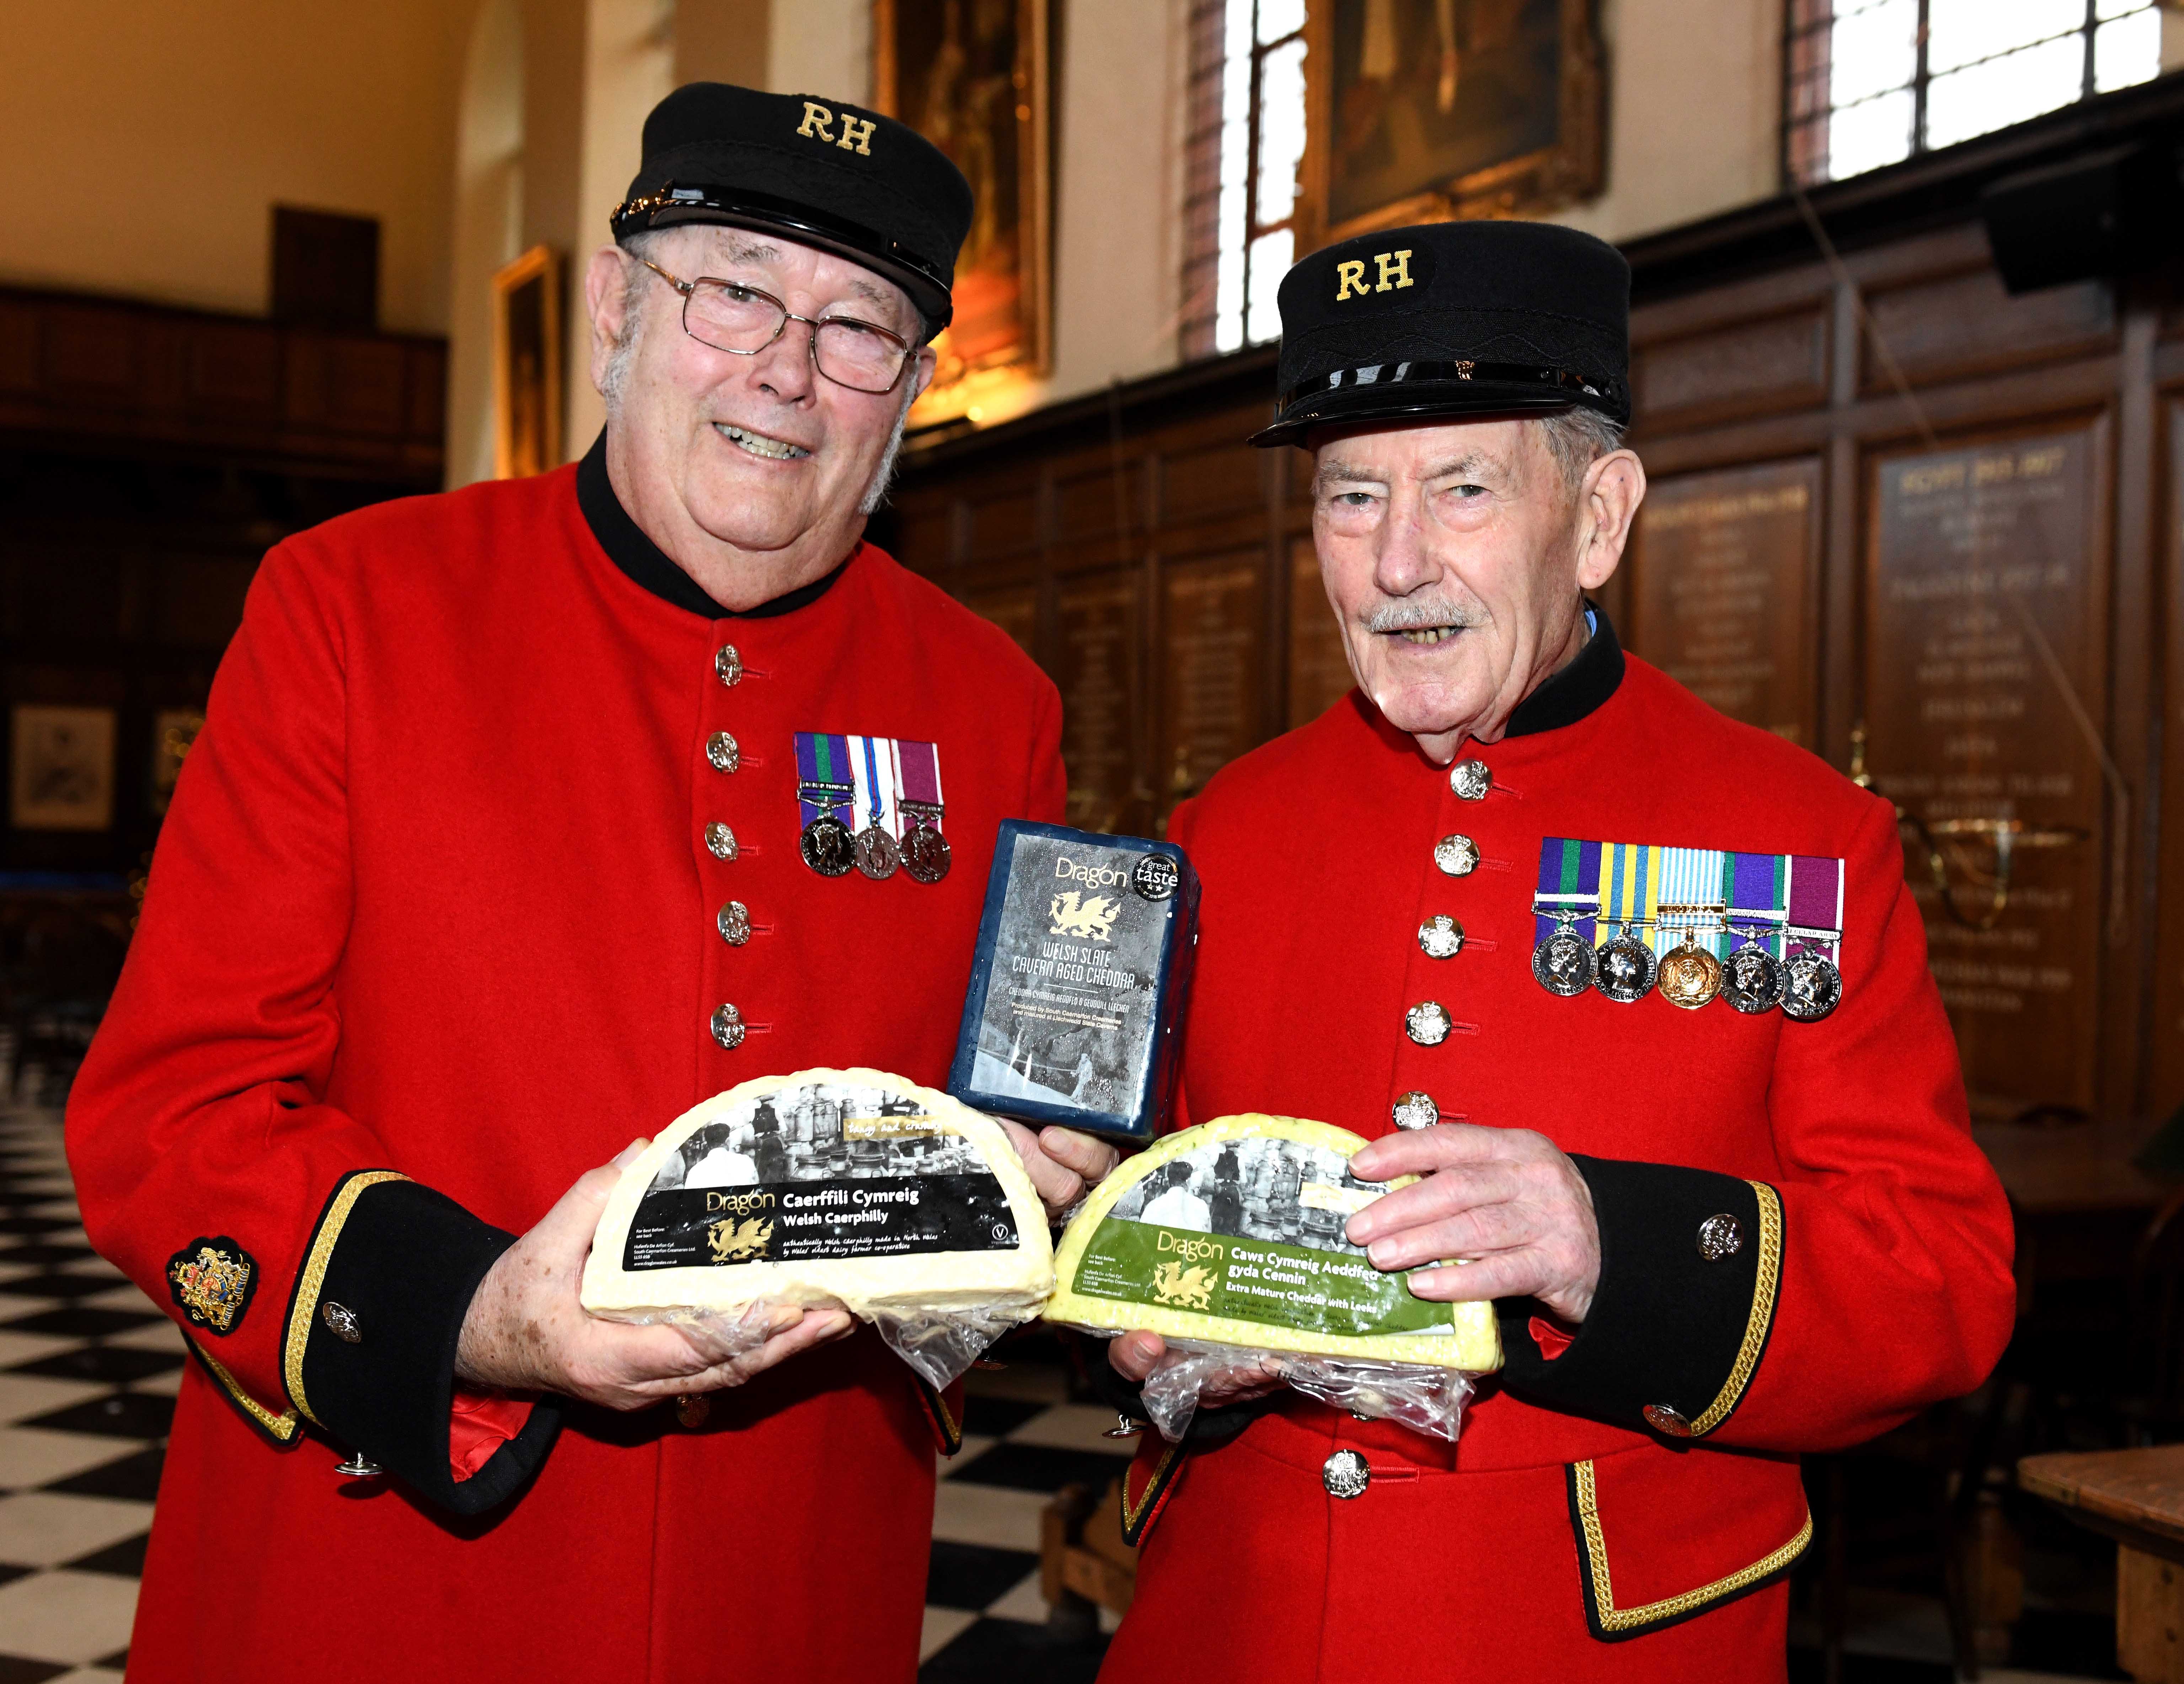 Top cheesemakers bring a slice of festive cheer to veterans